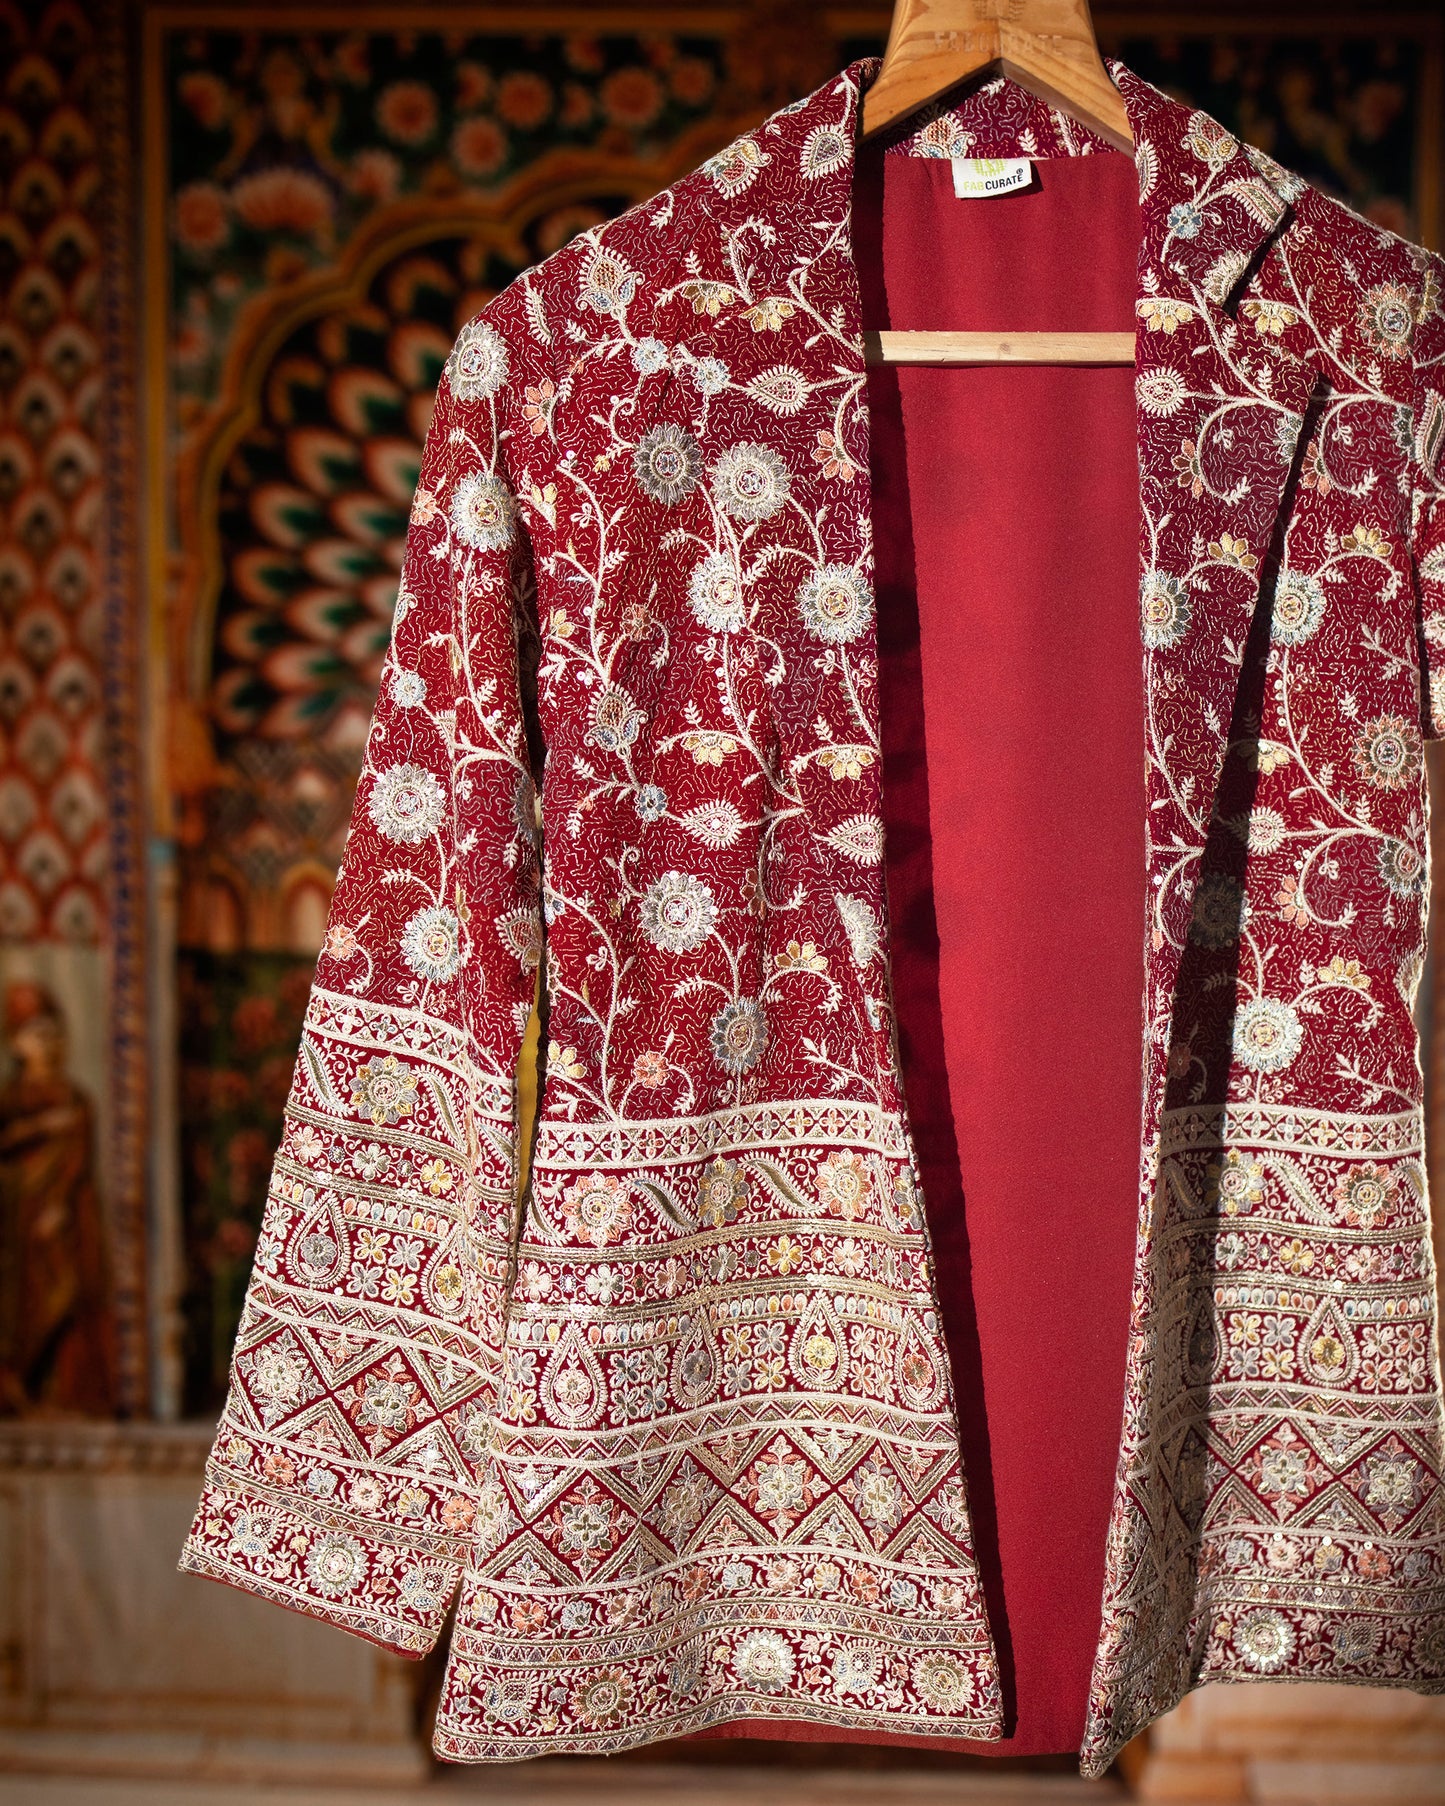 Limited Edition: Women's Jacket With Kashmiri Embroidery